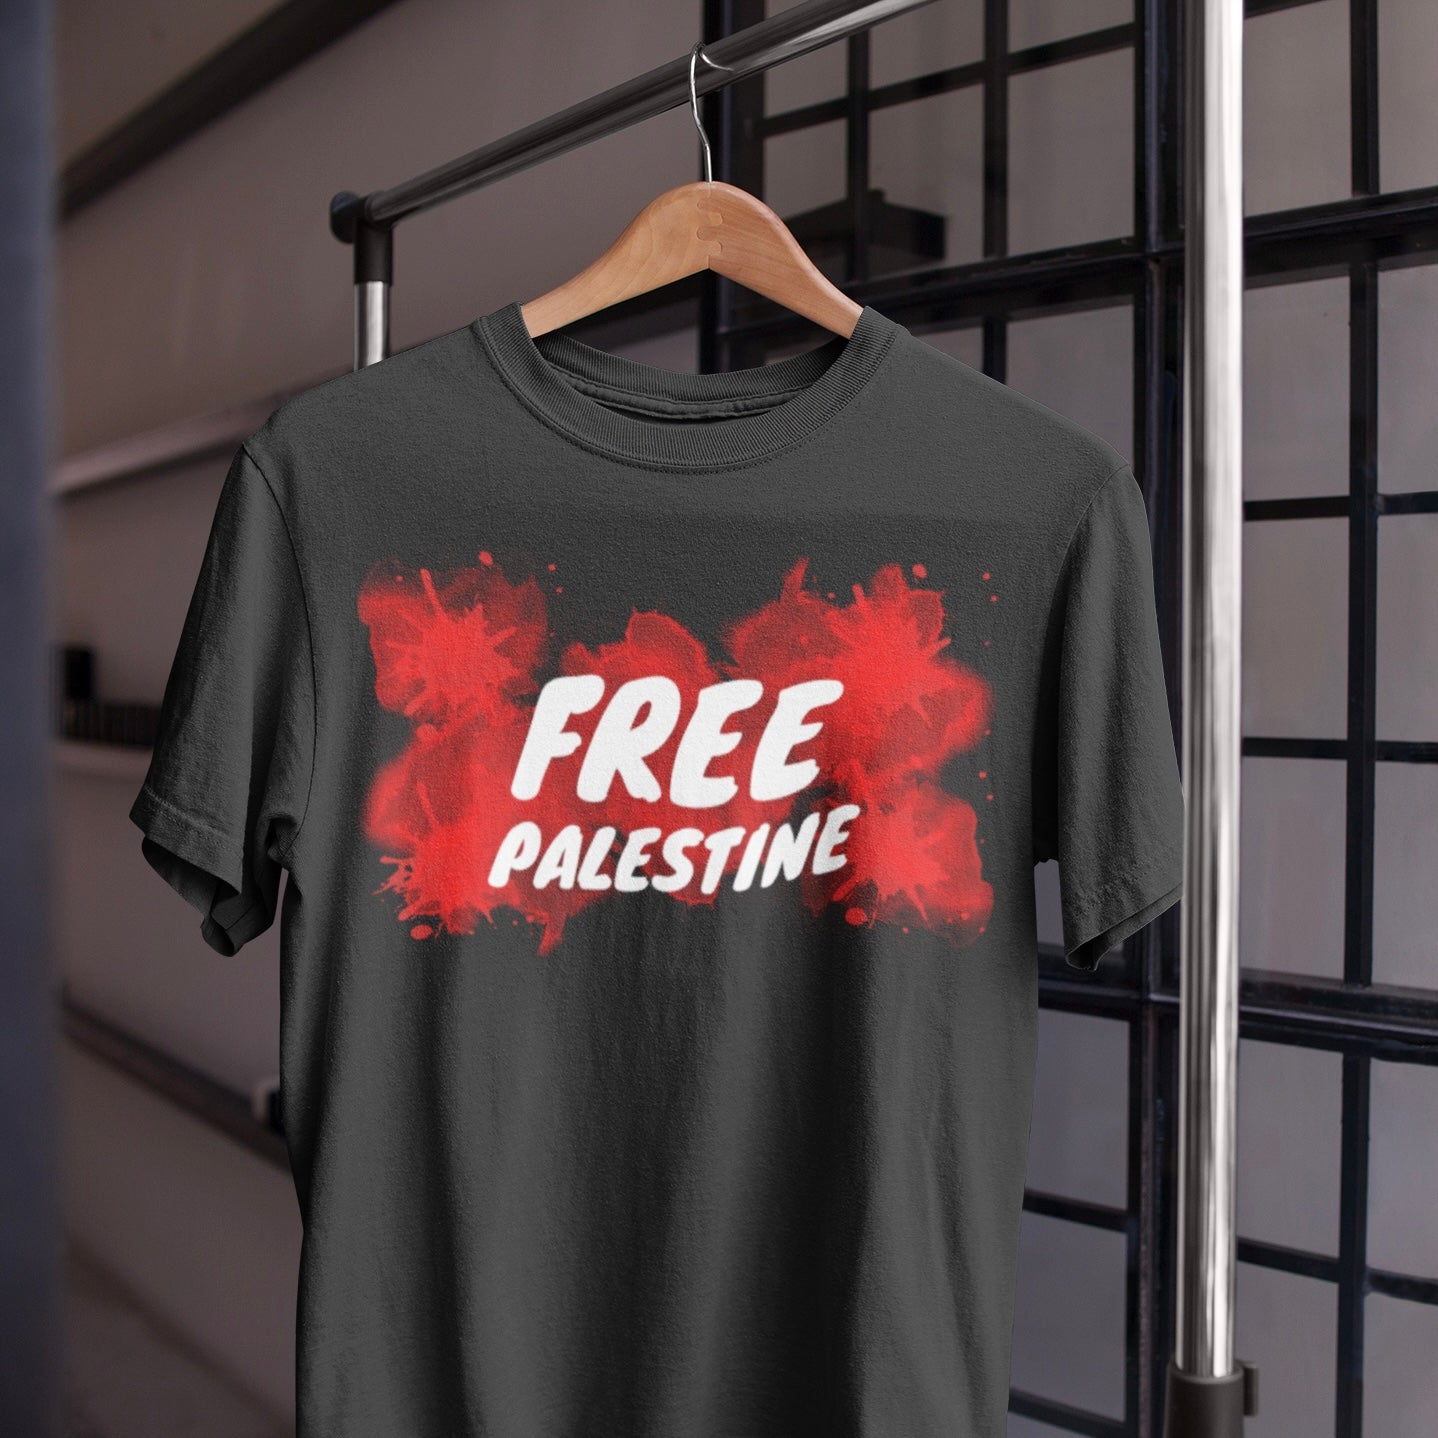 Free Palestine - T-Shirt (All profit will be Donated)